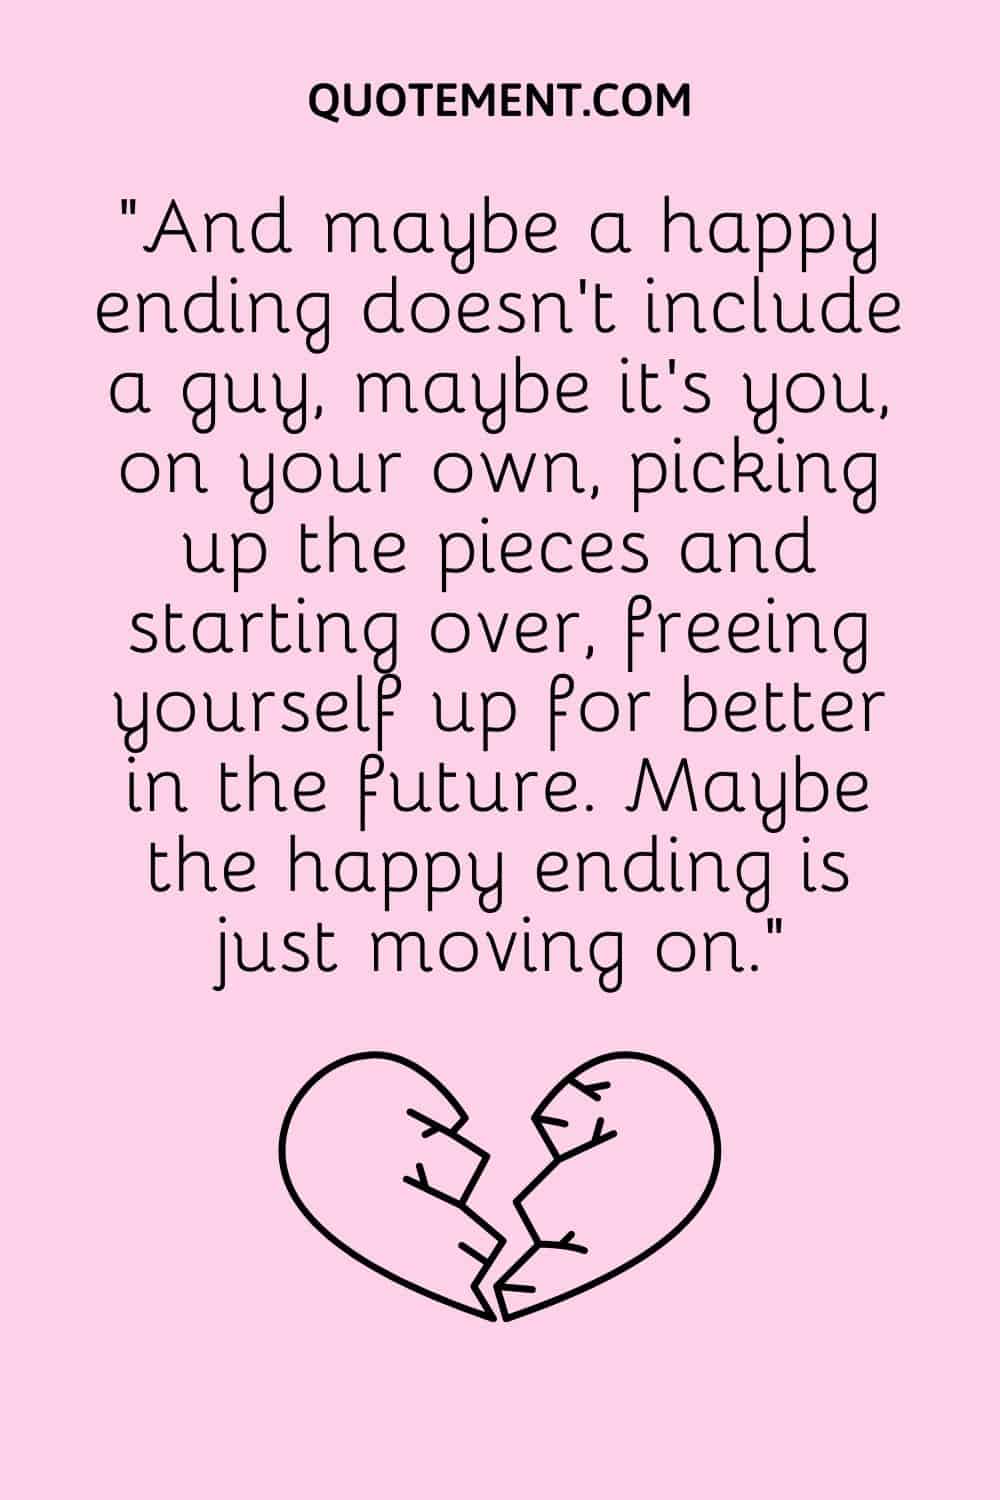 “And maybe a happy ending doesn’t include a guy, maybe it’s you, on your own, picking up the pieces and starting over, freeing yourself up for better in the future. Maybe the happy ending is just moving on.”